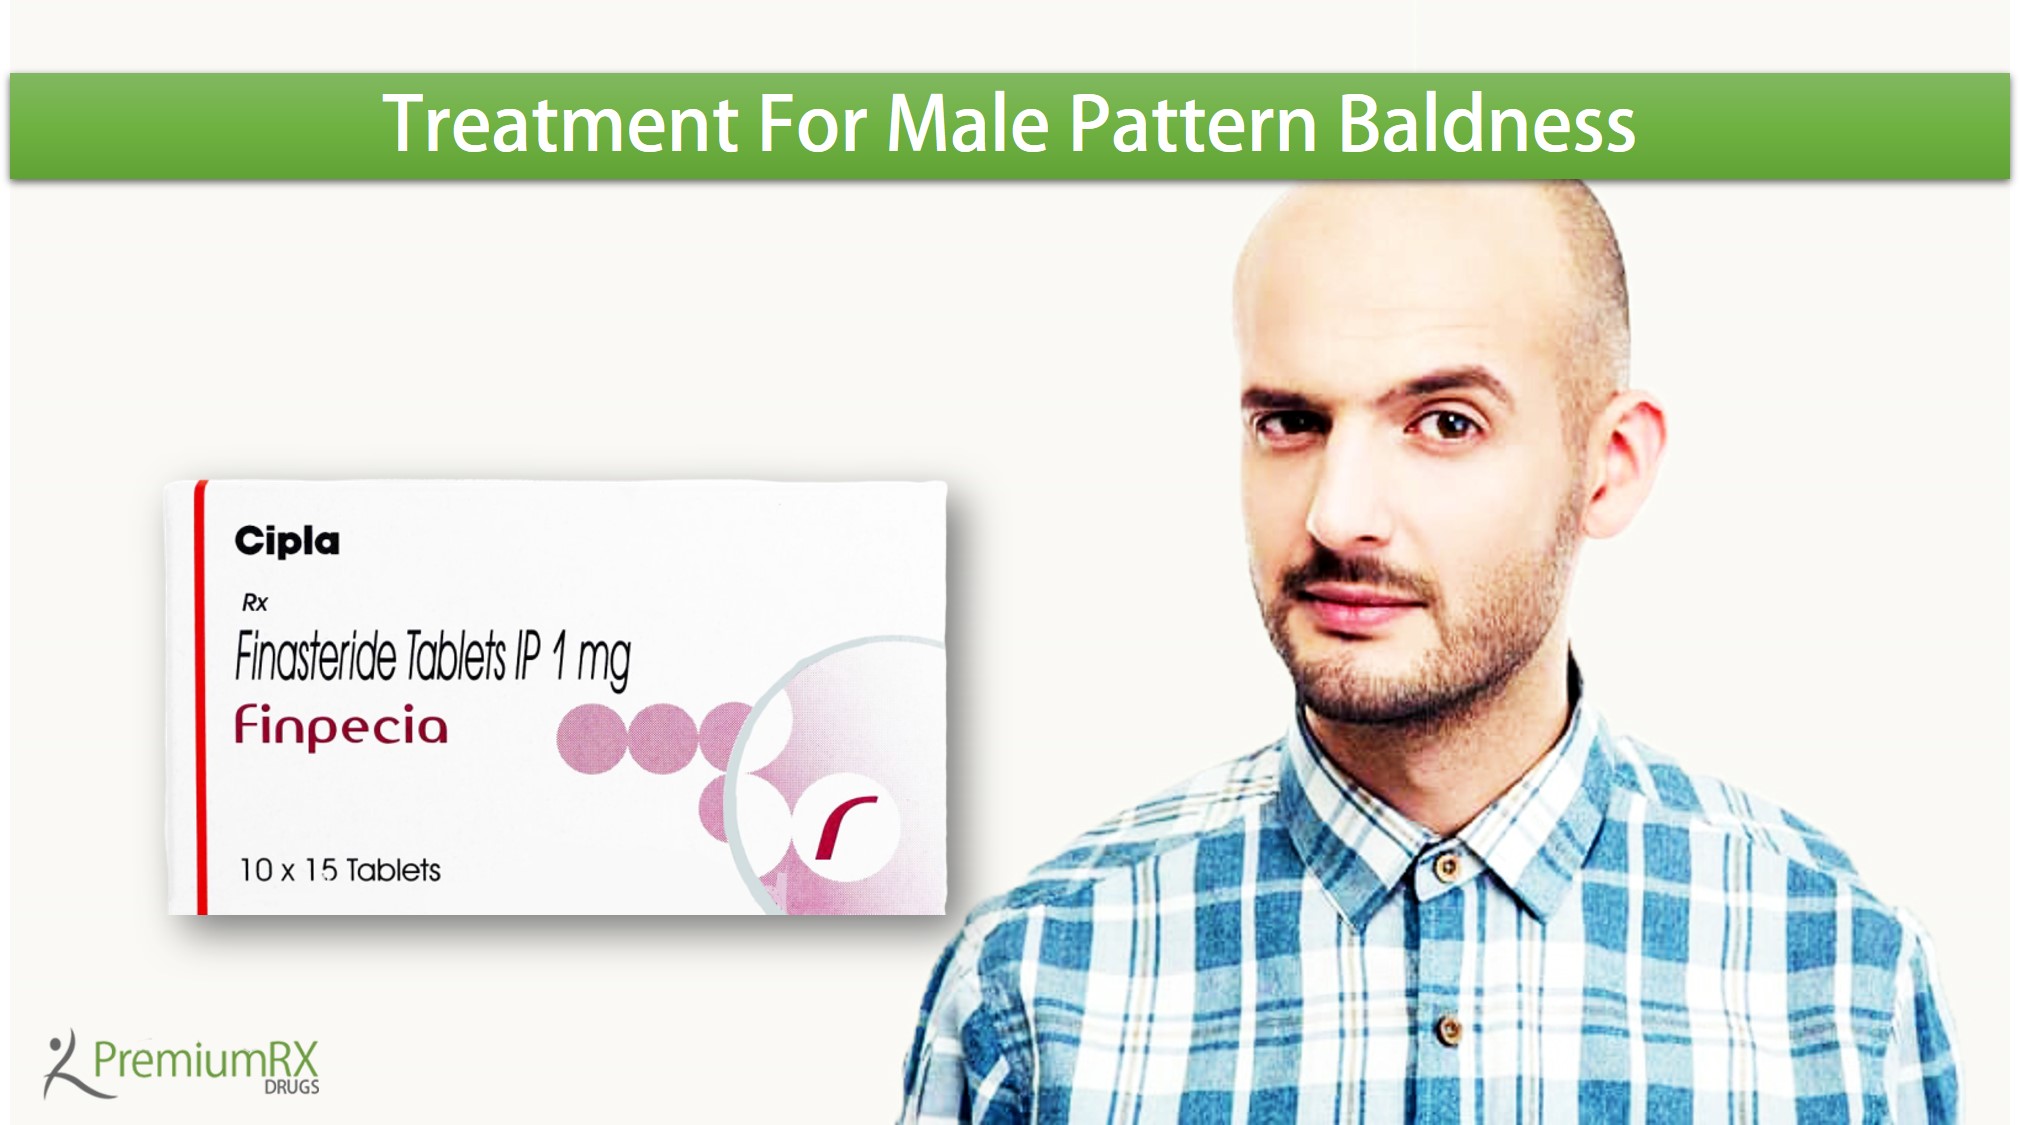 Treatment For Male Pattern Baldness